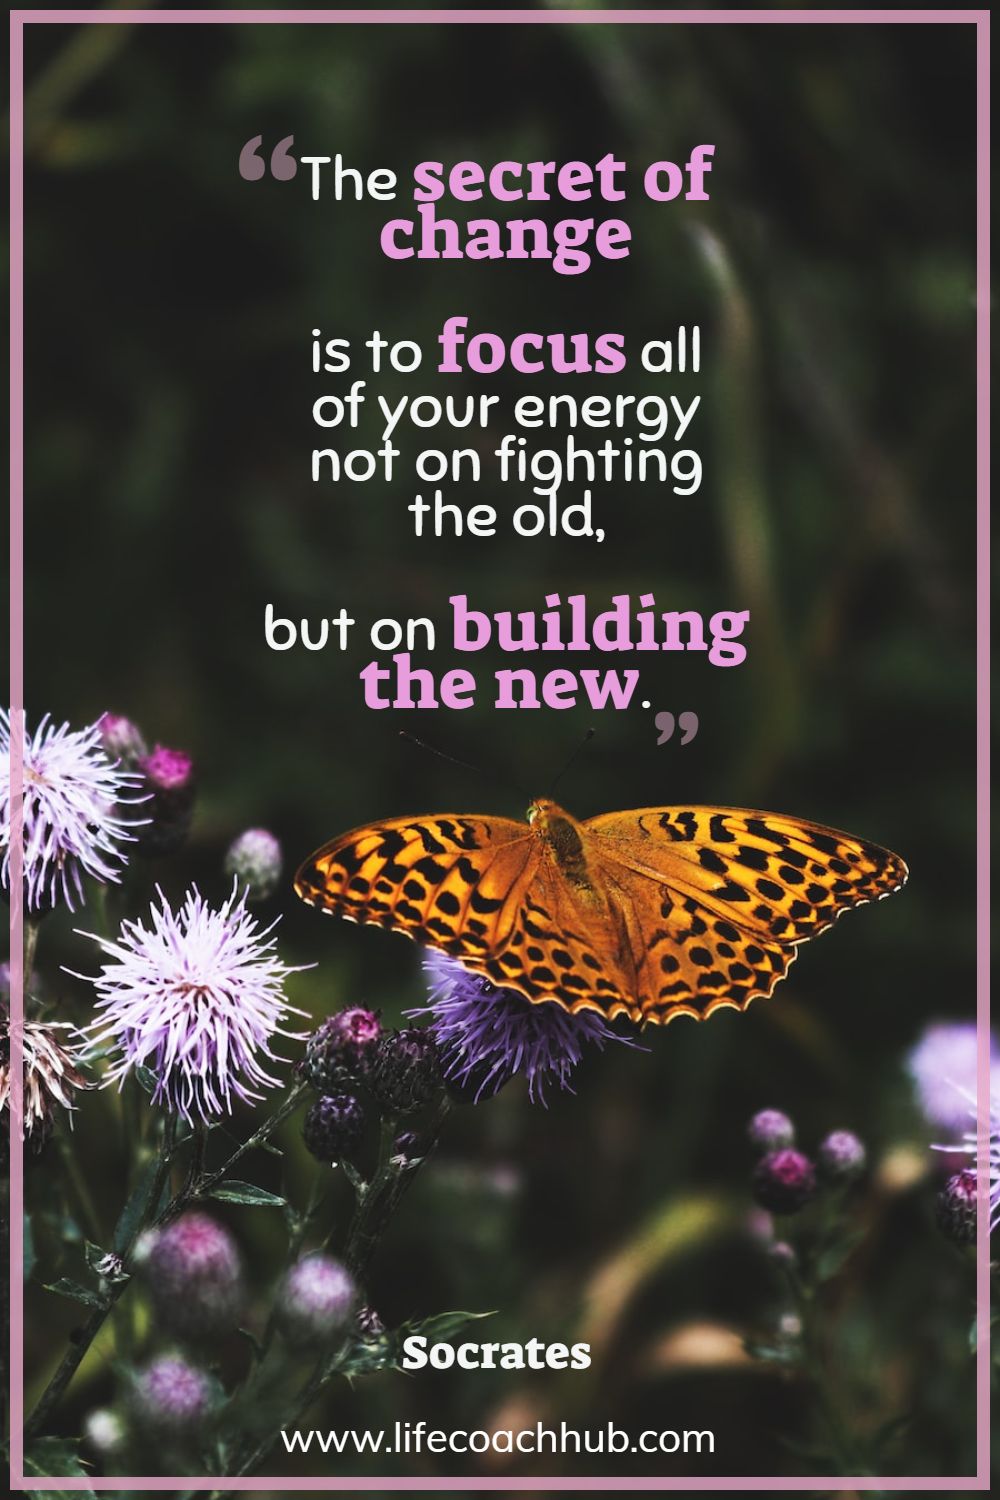 The secret of change is to focus all of your energy, not on fighting the old, but on building the new. Socrates Coaching Quote